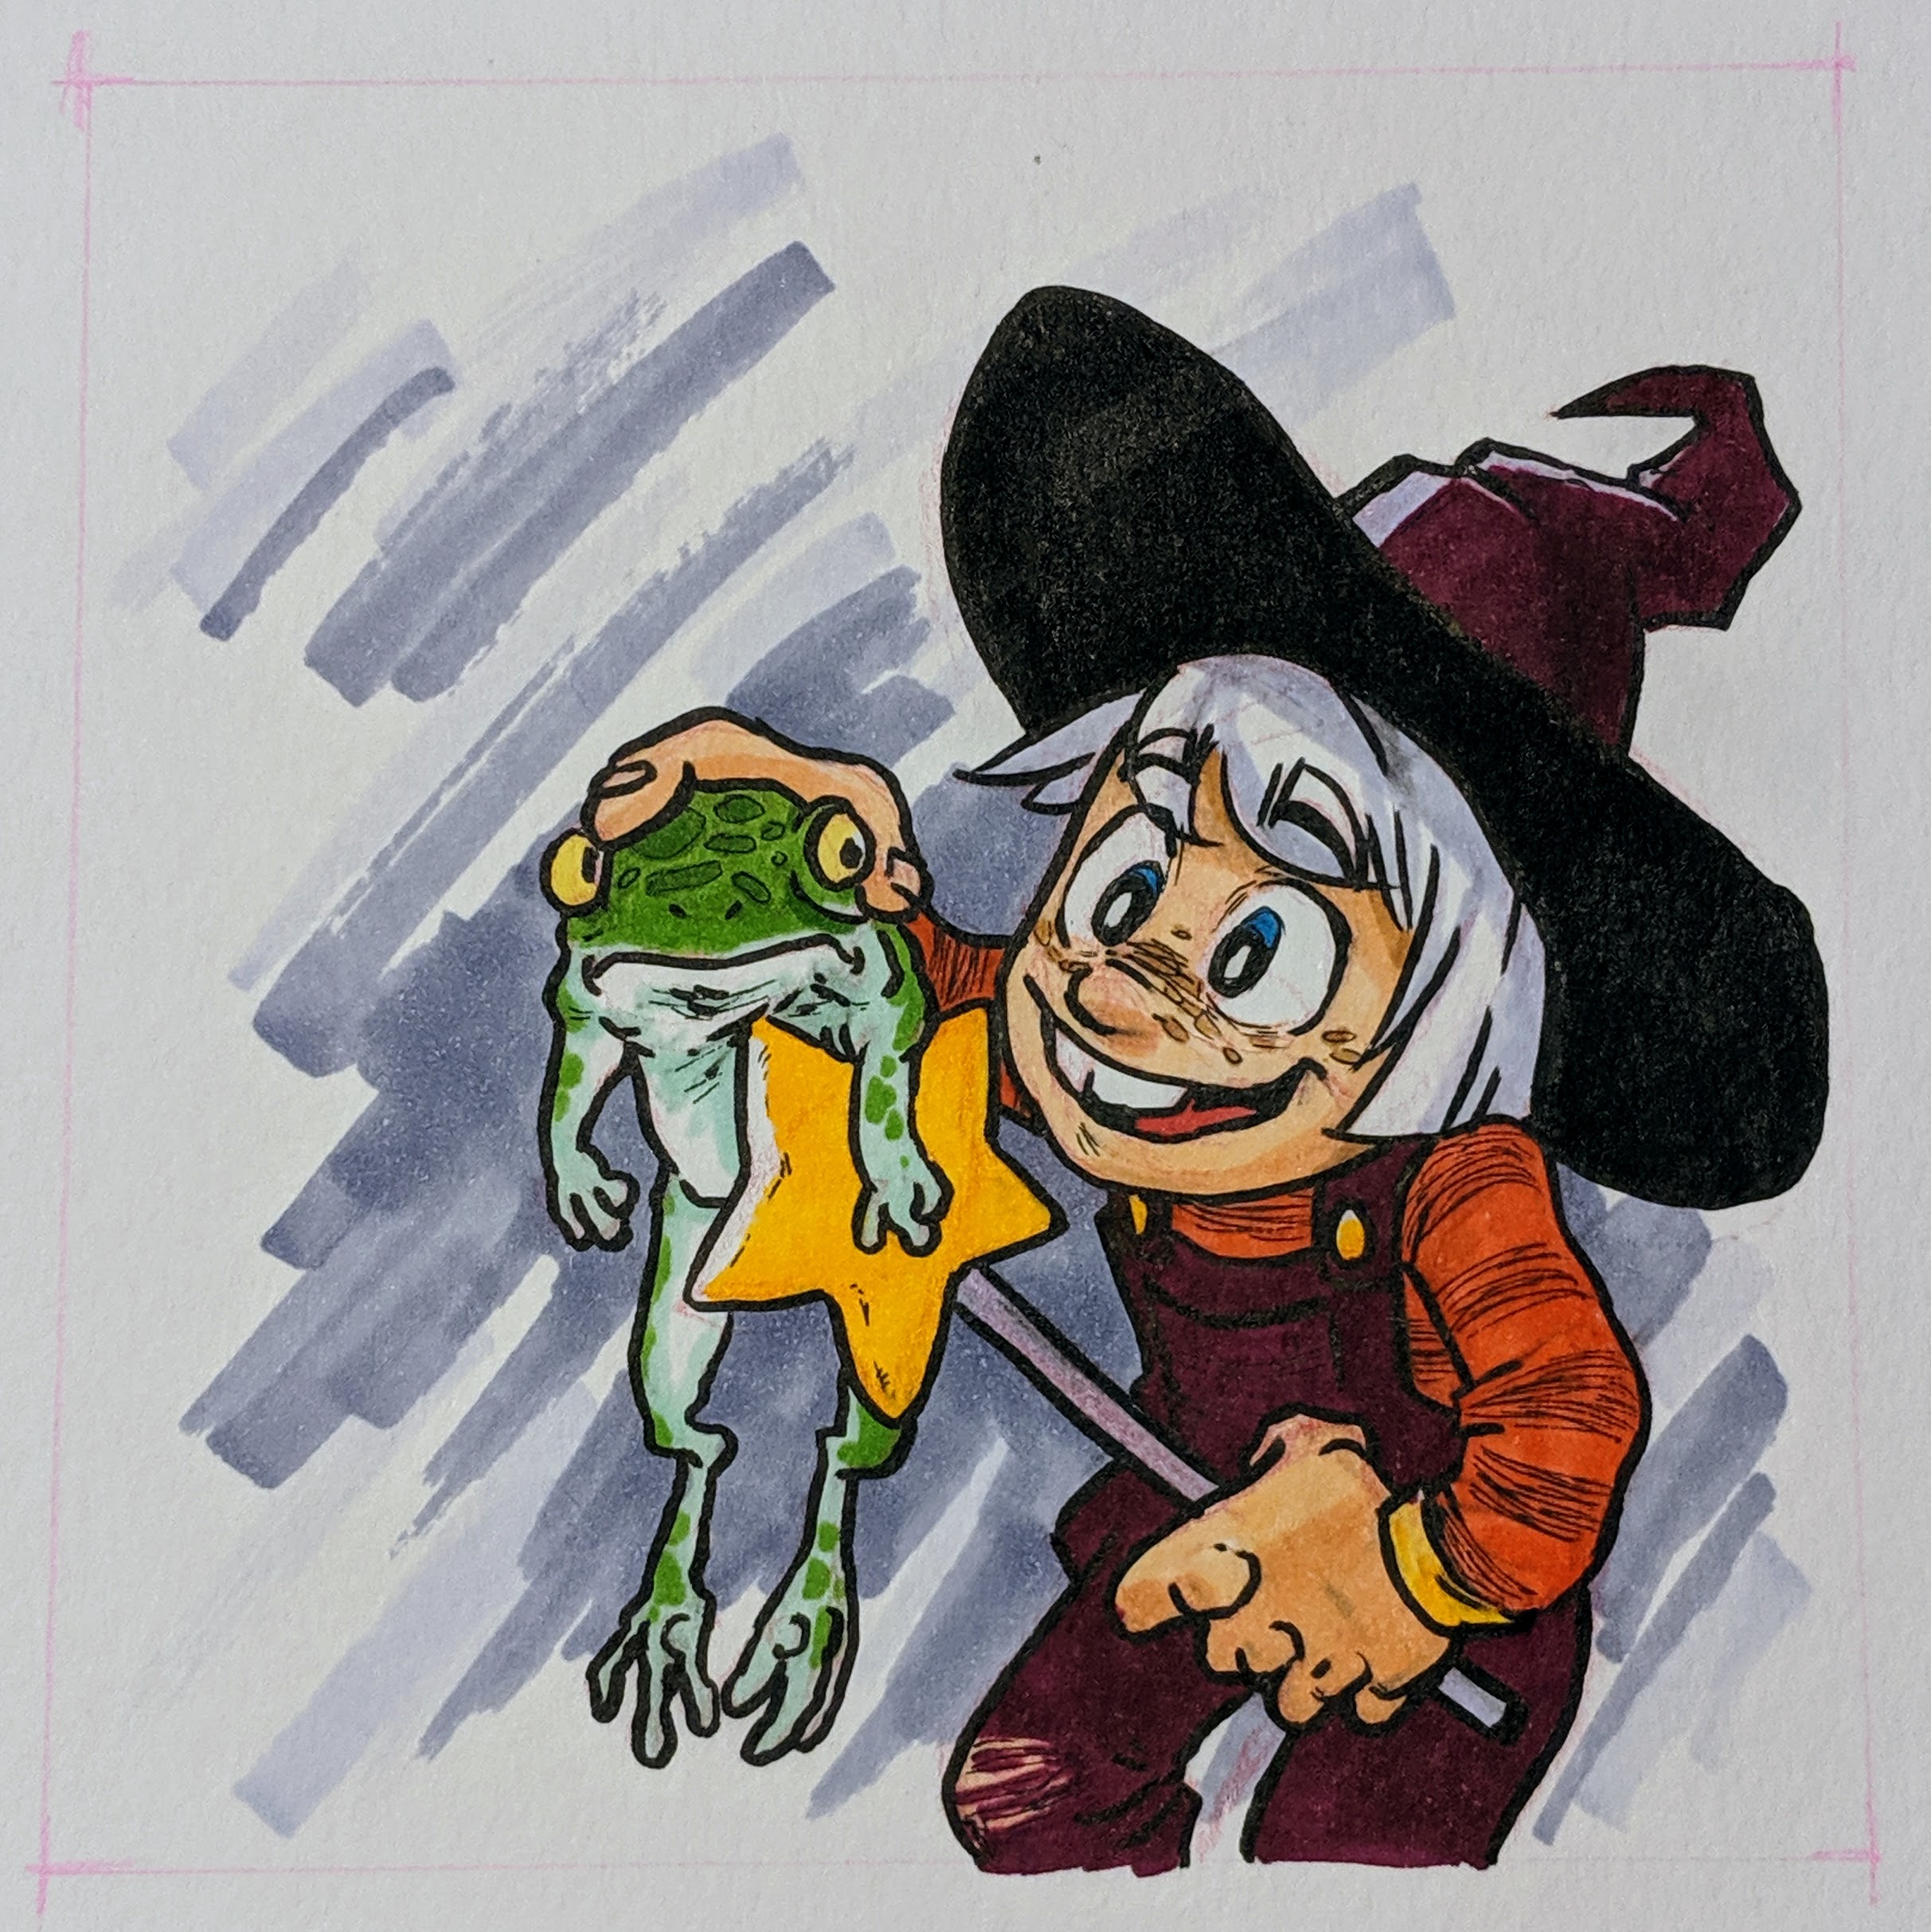 A child witch holding a perturbed frog and taunting it with their wand